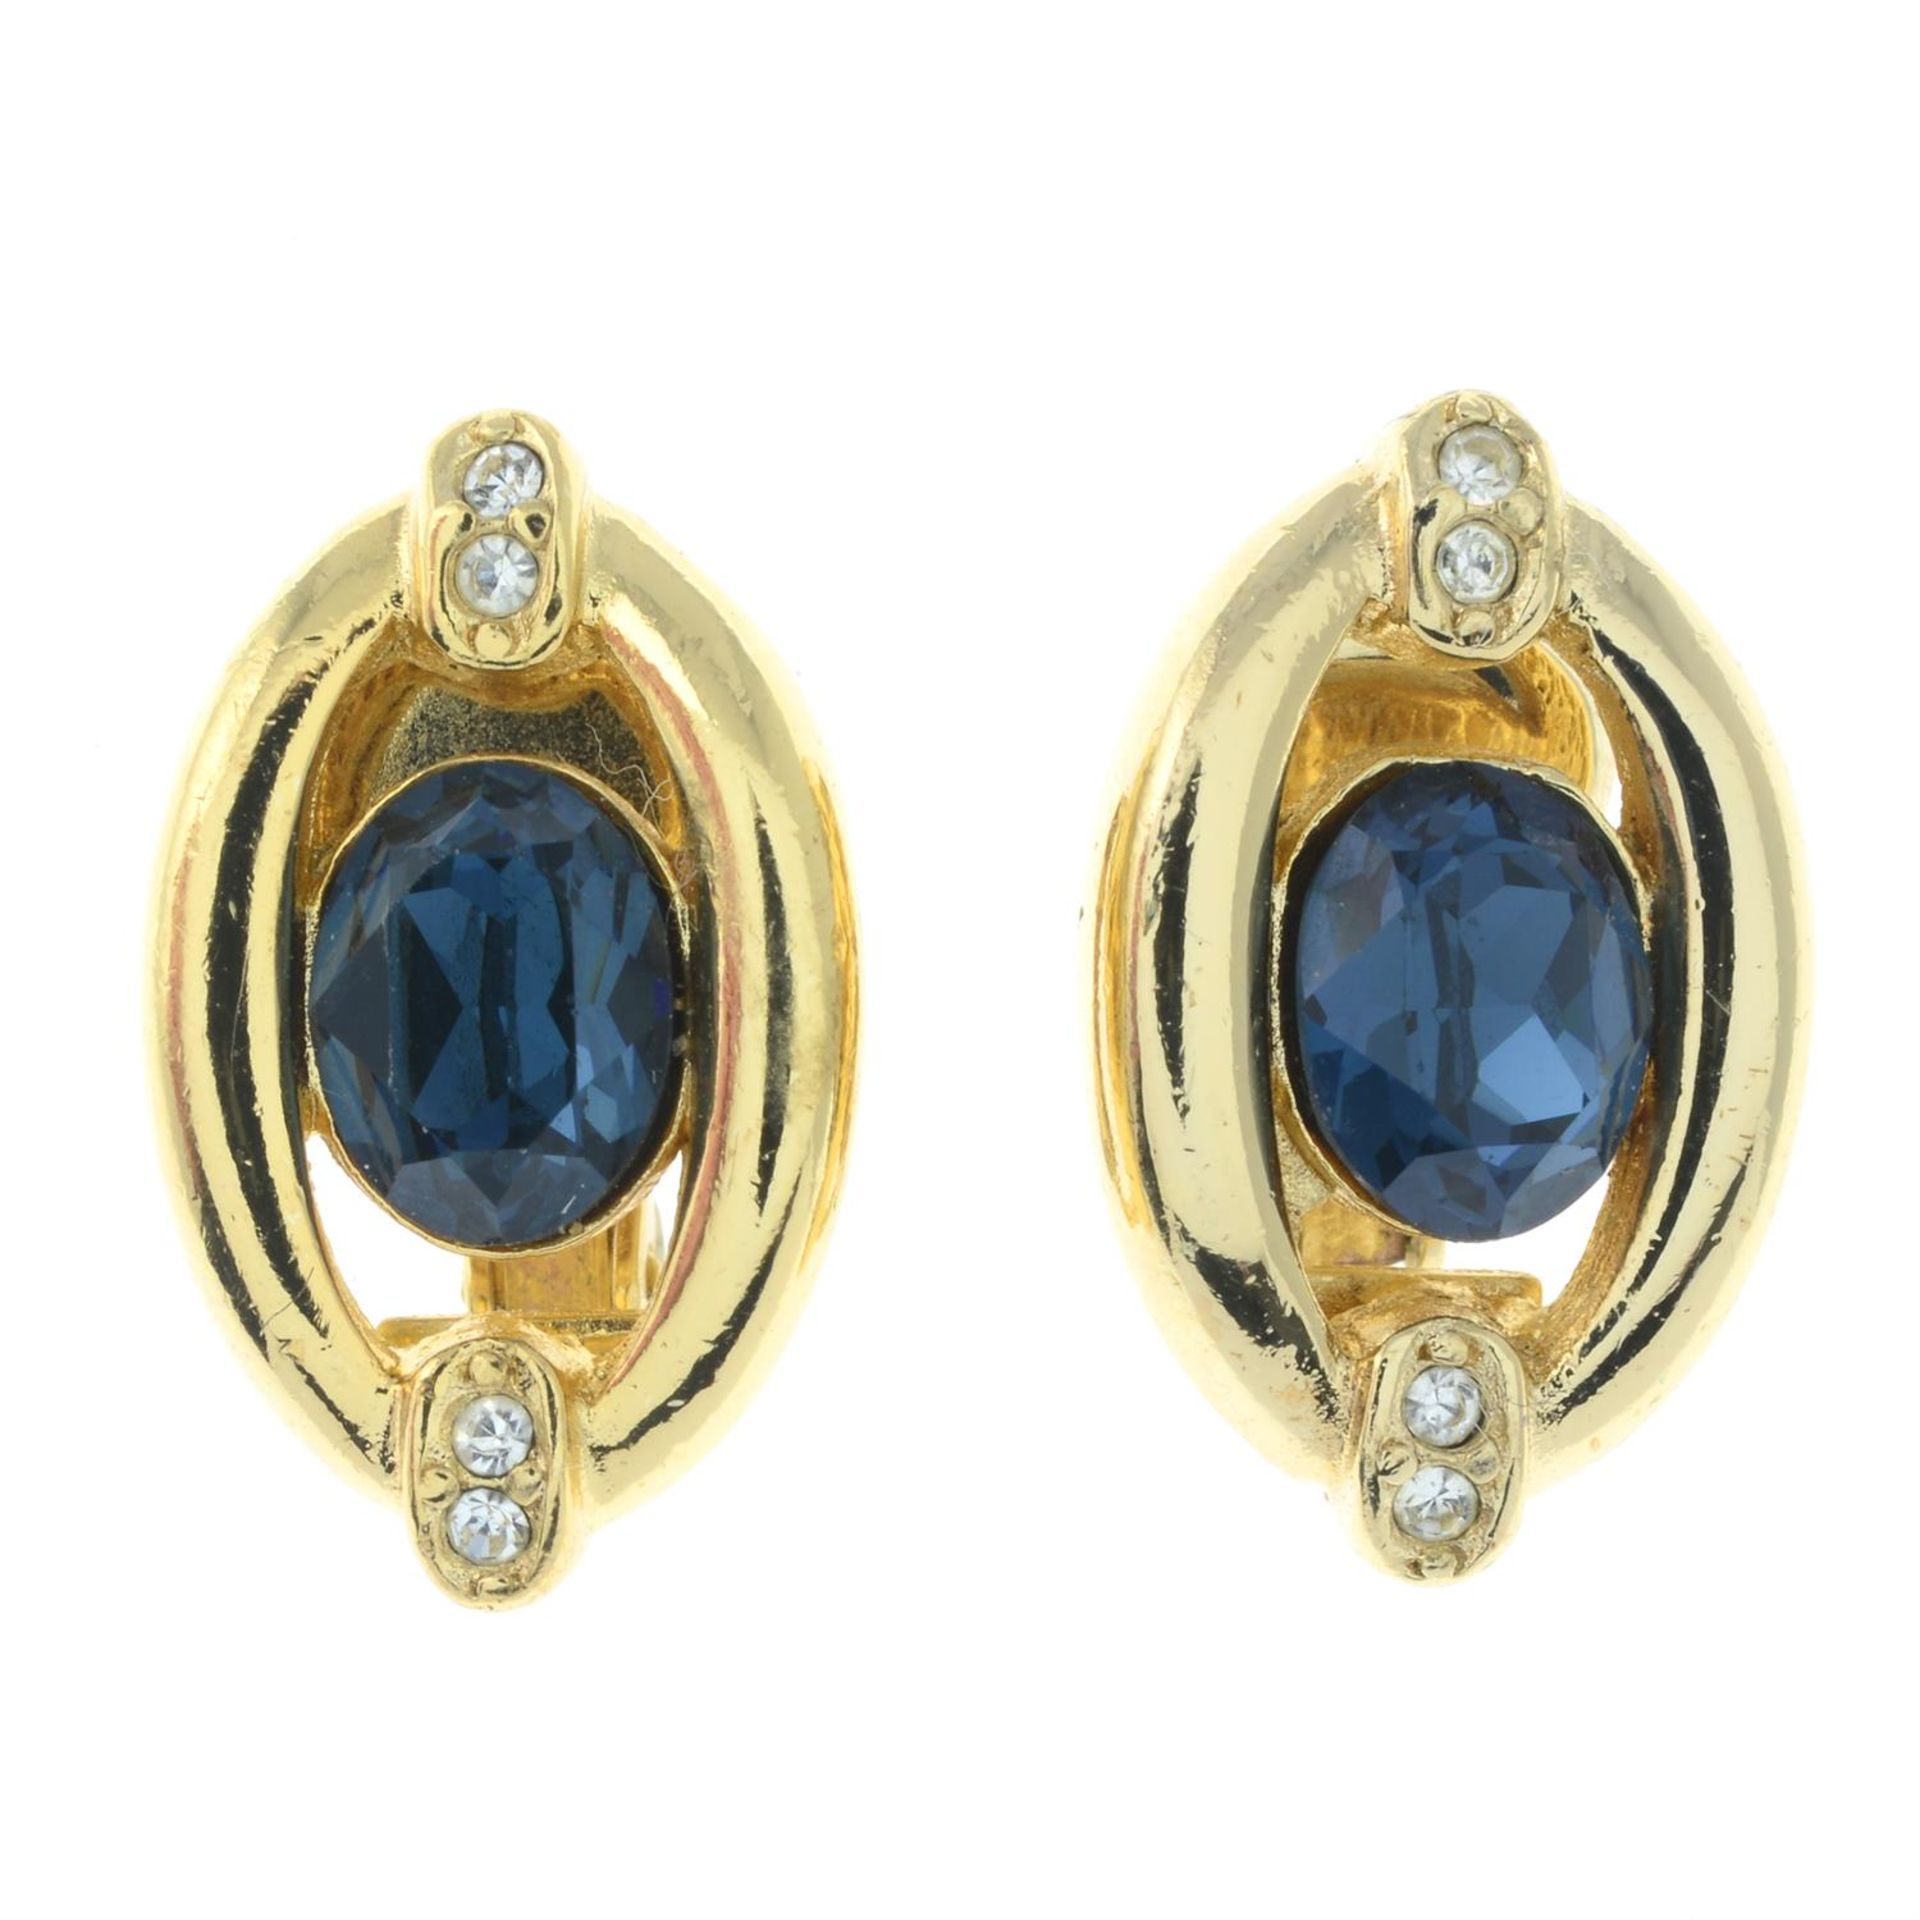 CHRISTIAN DIOR- a pair of clip-on earrings.